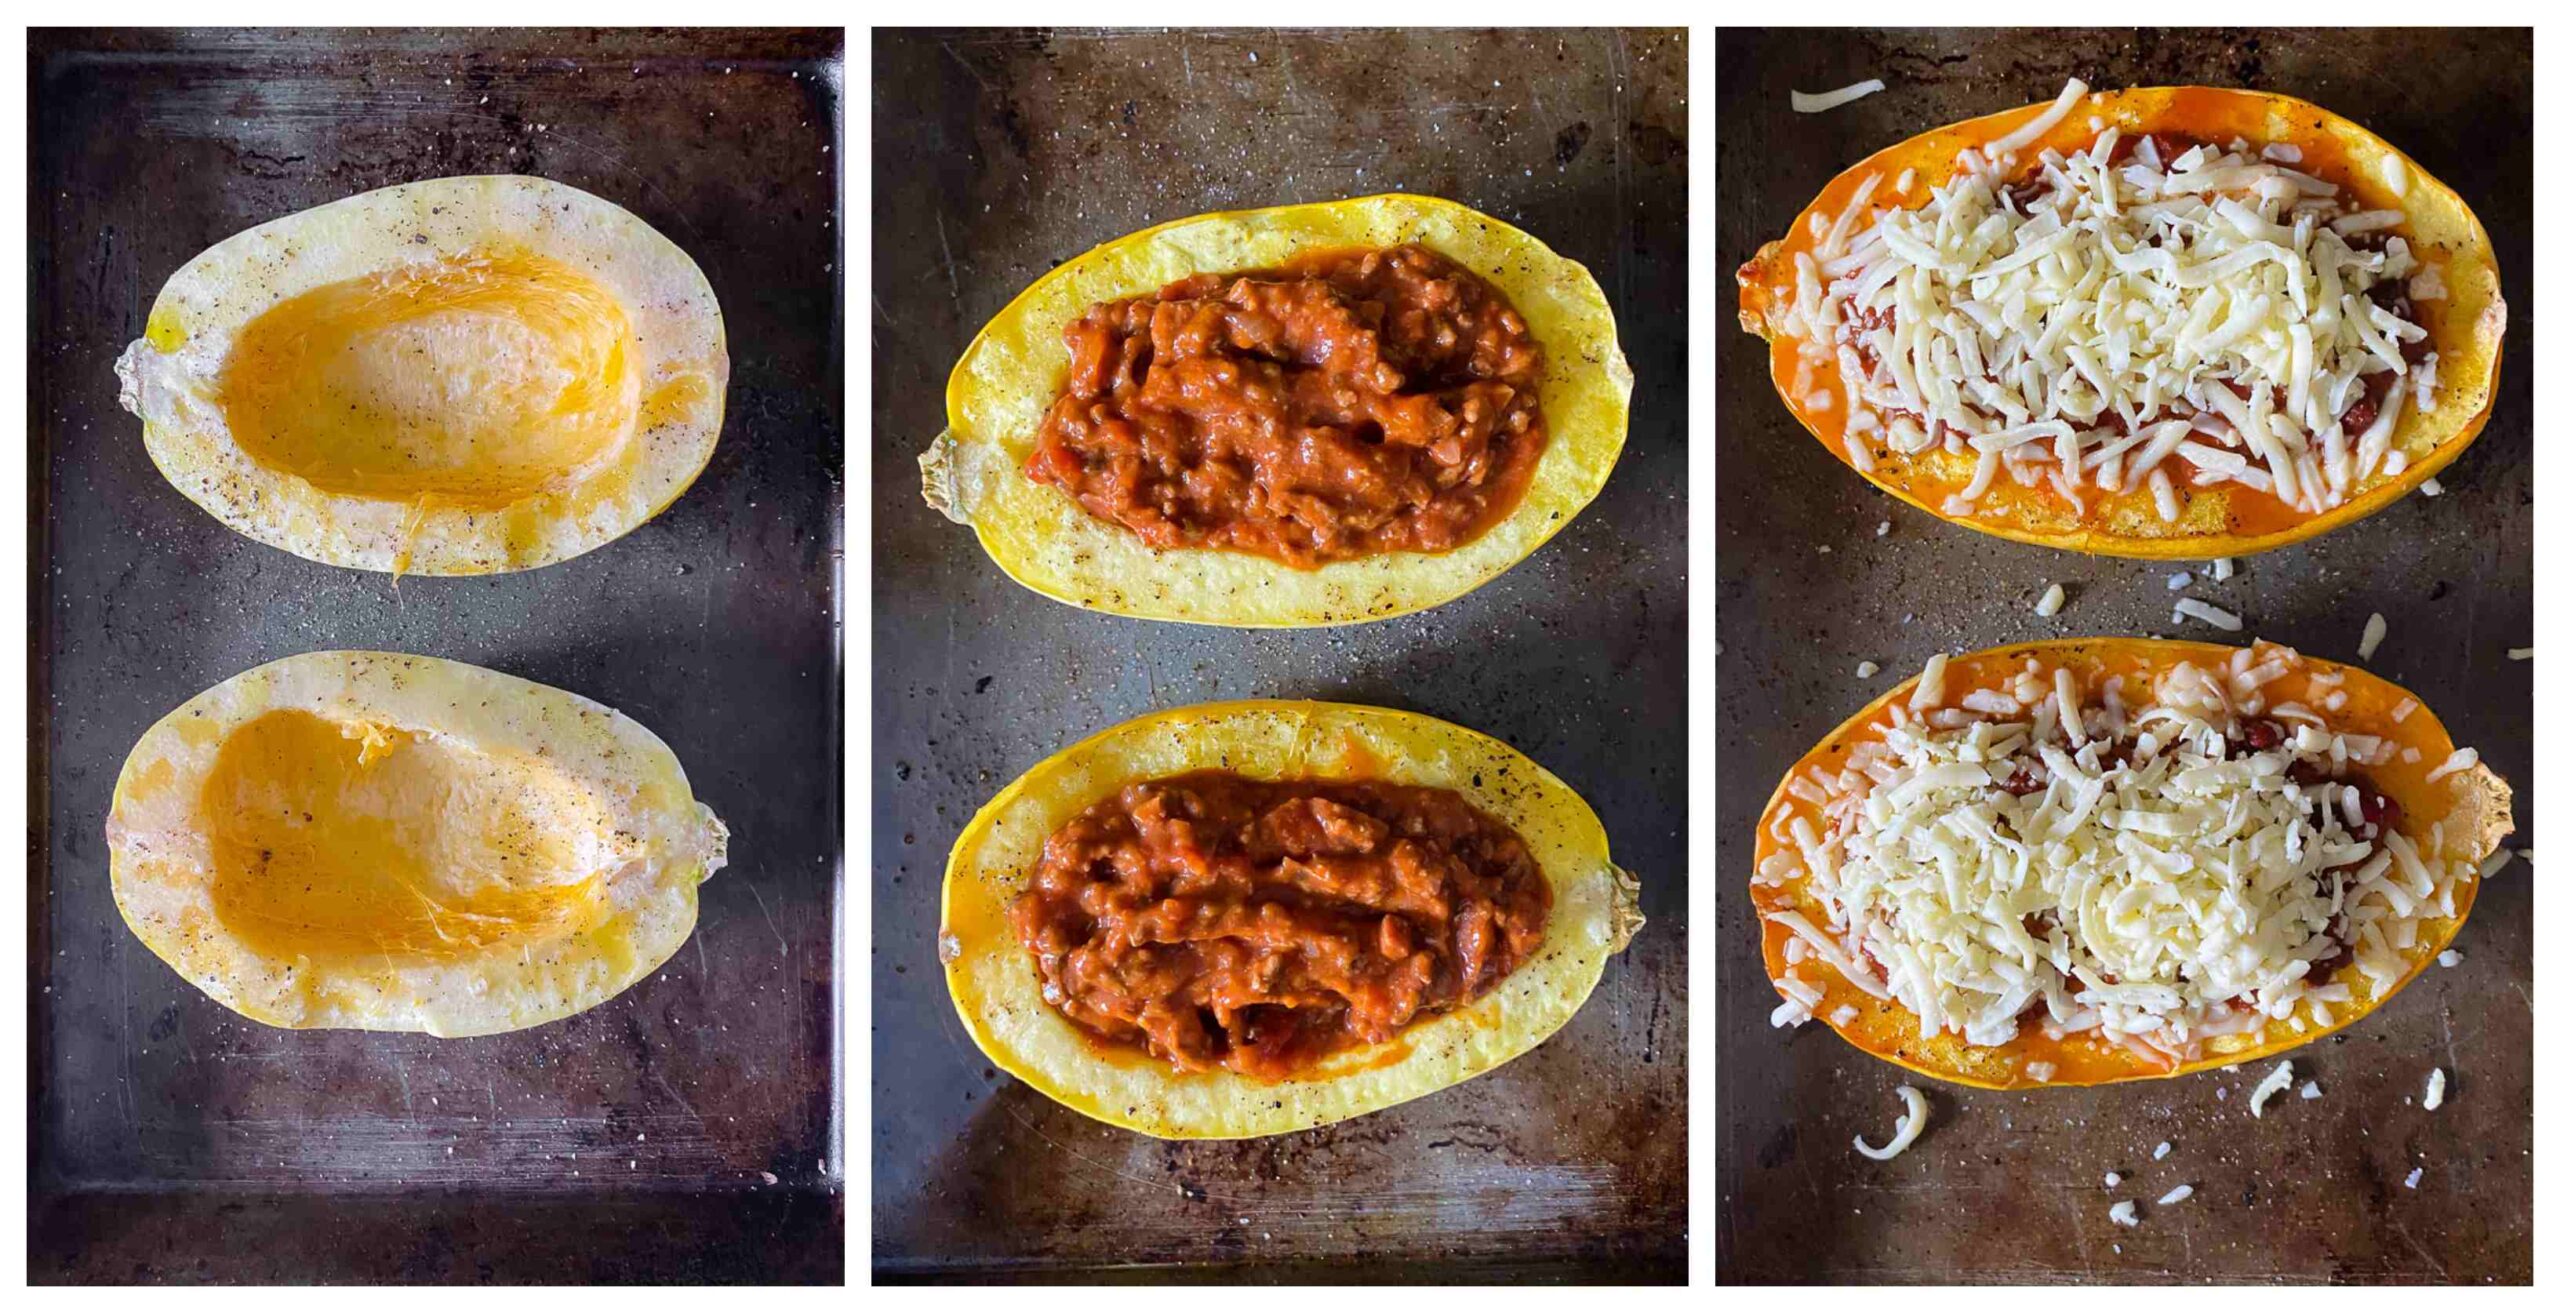 images of 3 stages of roasting spaghetti squash stuffed with bolognese sauce